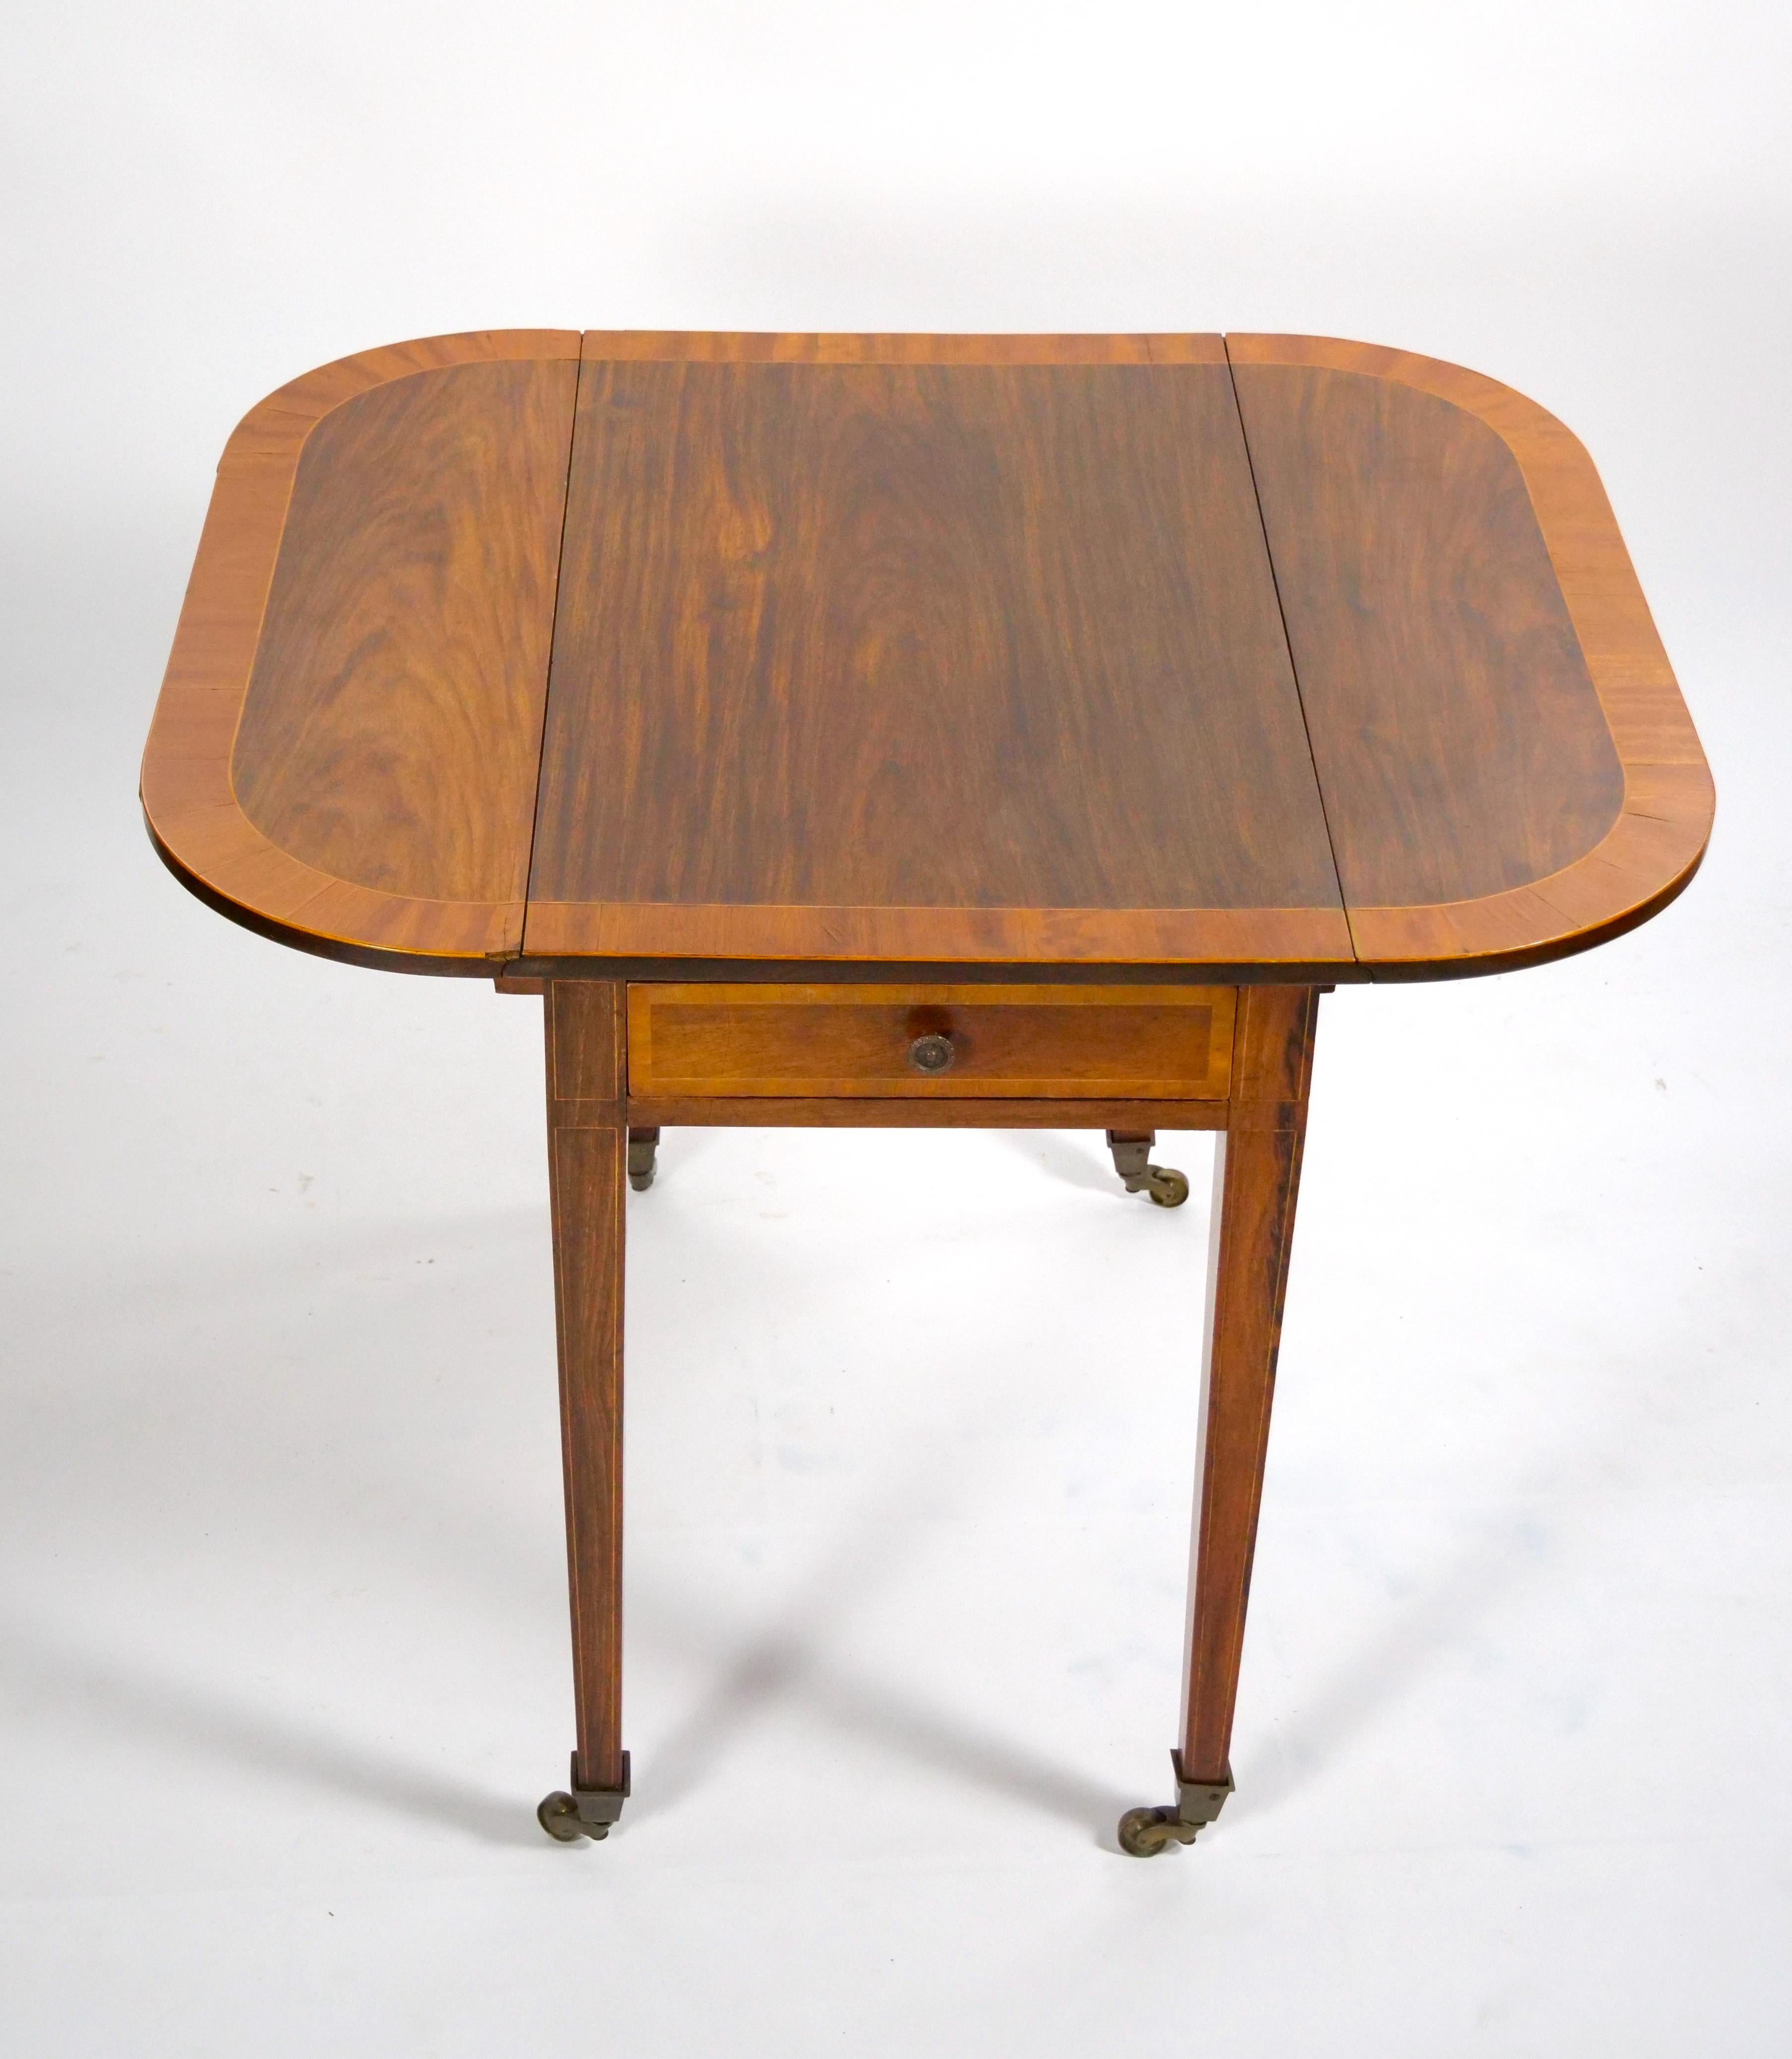 English Burl Mahogany Two Folding Leaves Extension Table In Good Condition For Sale In Tarry Town, NY